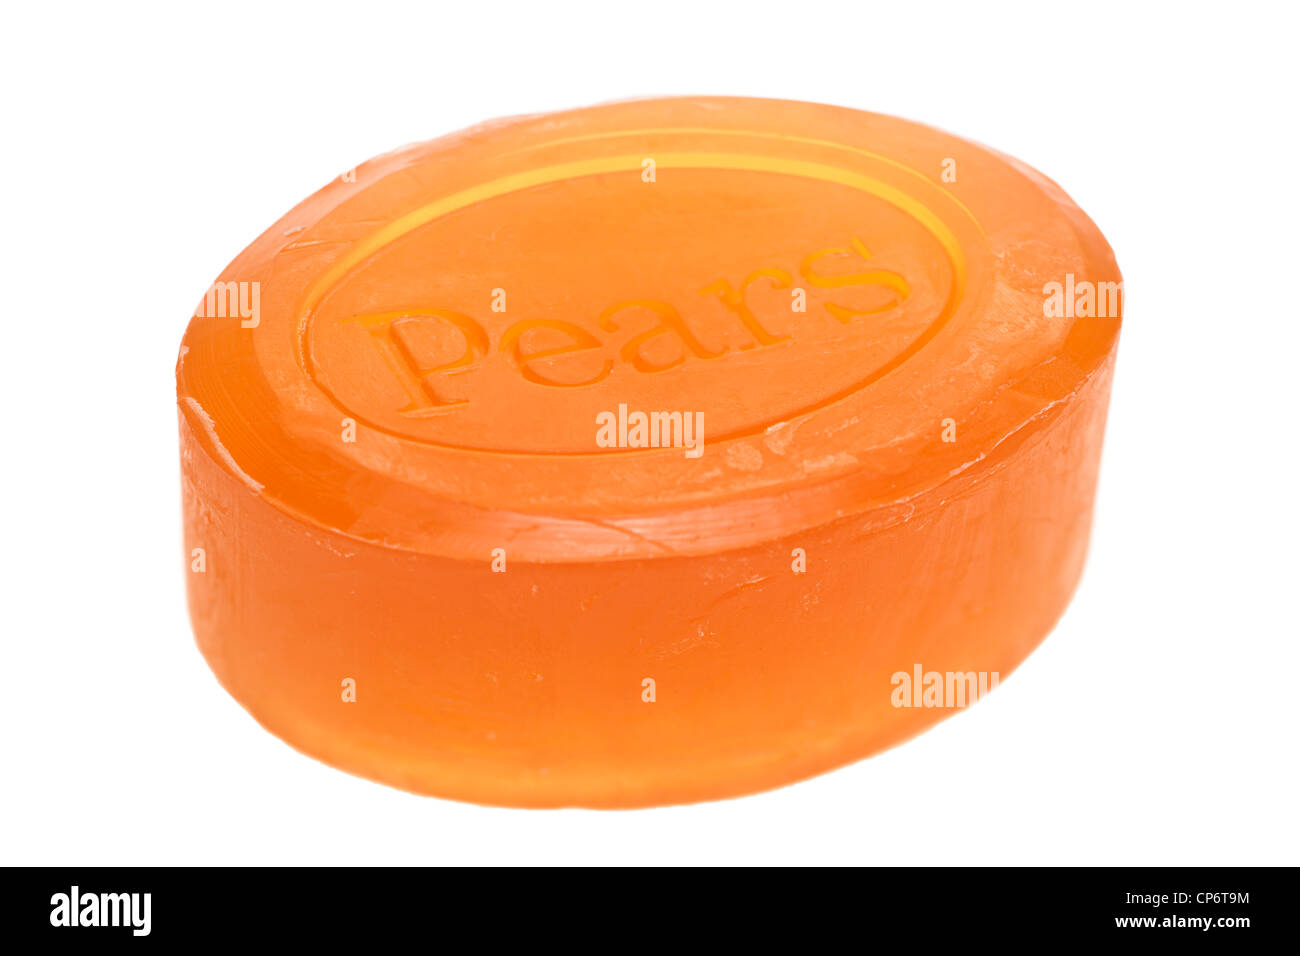 Bar of Pears soap Stock Photo